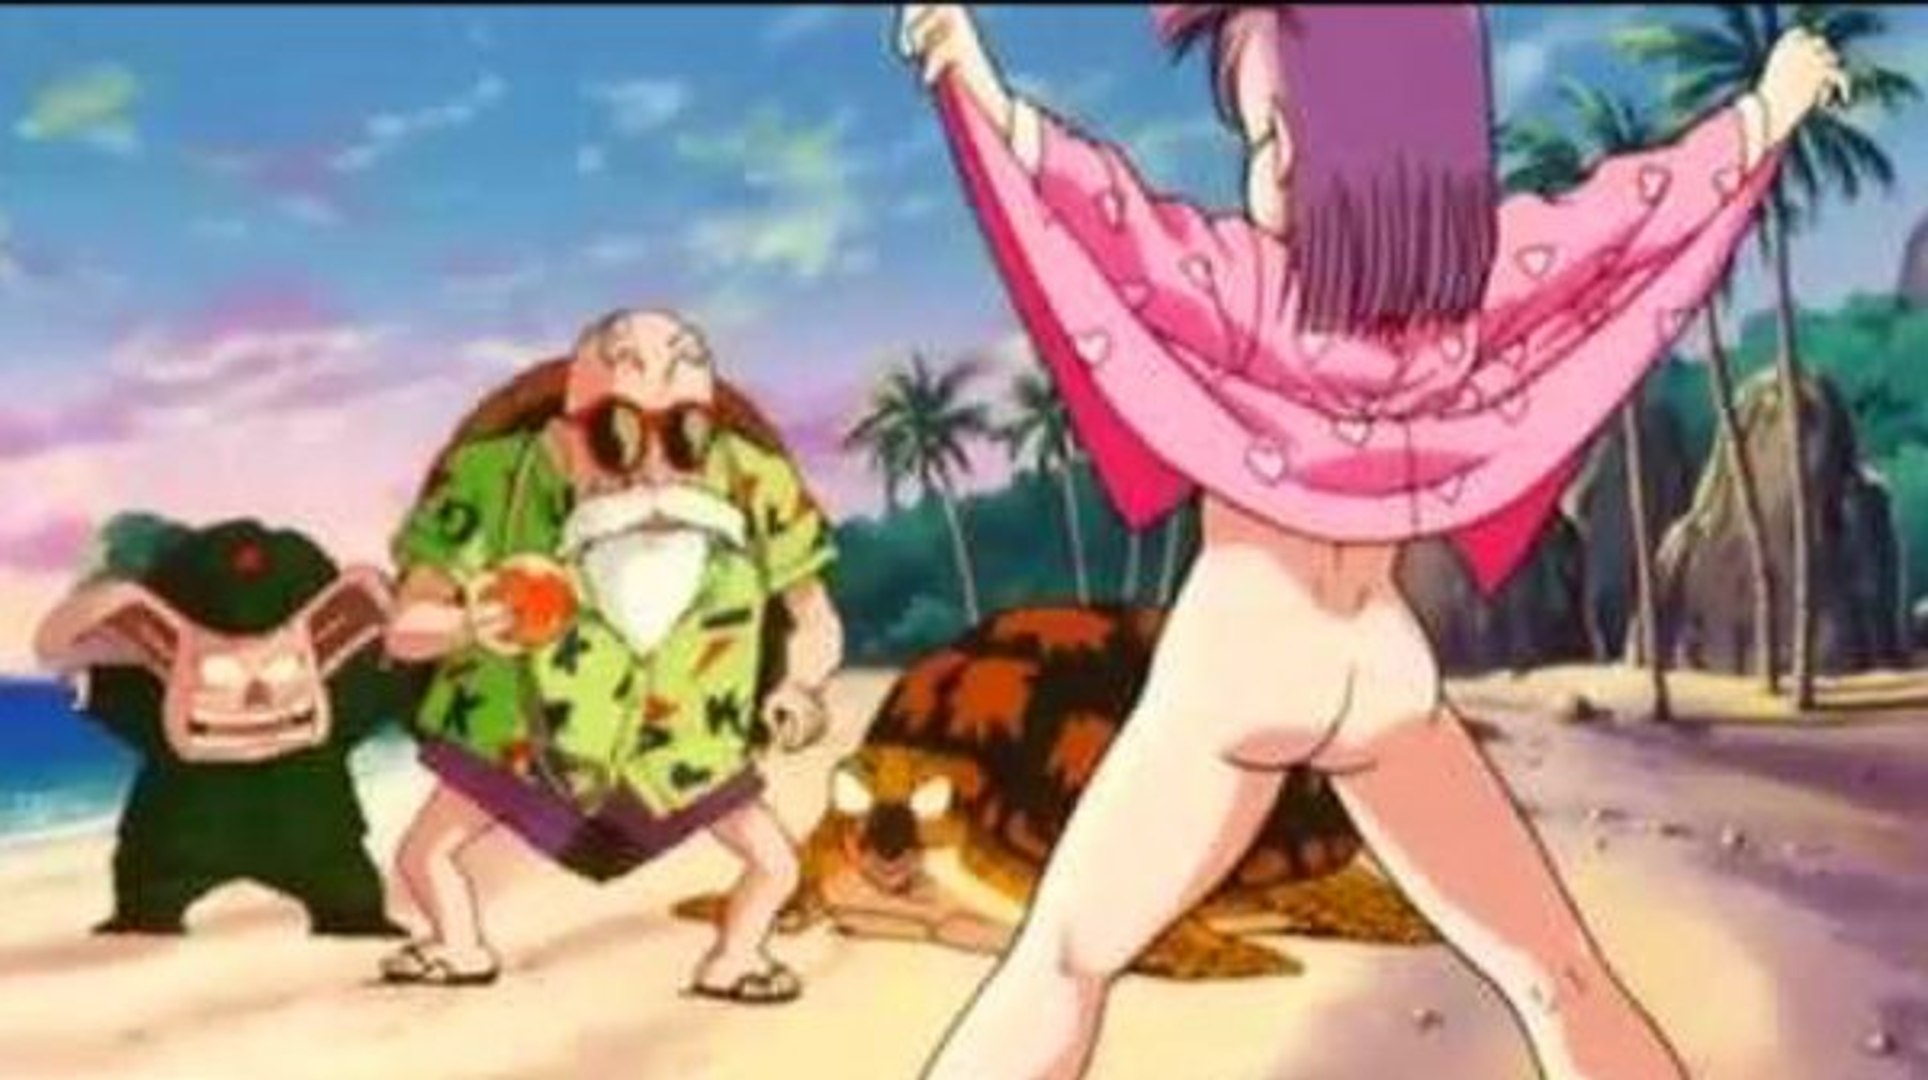 audrey emmons recommends Dragon Ball Z Nudity